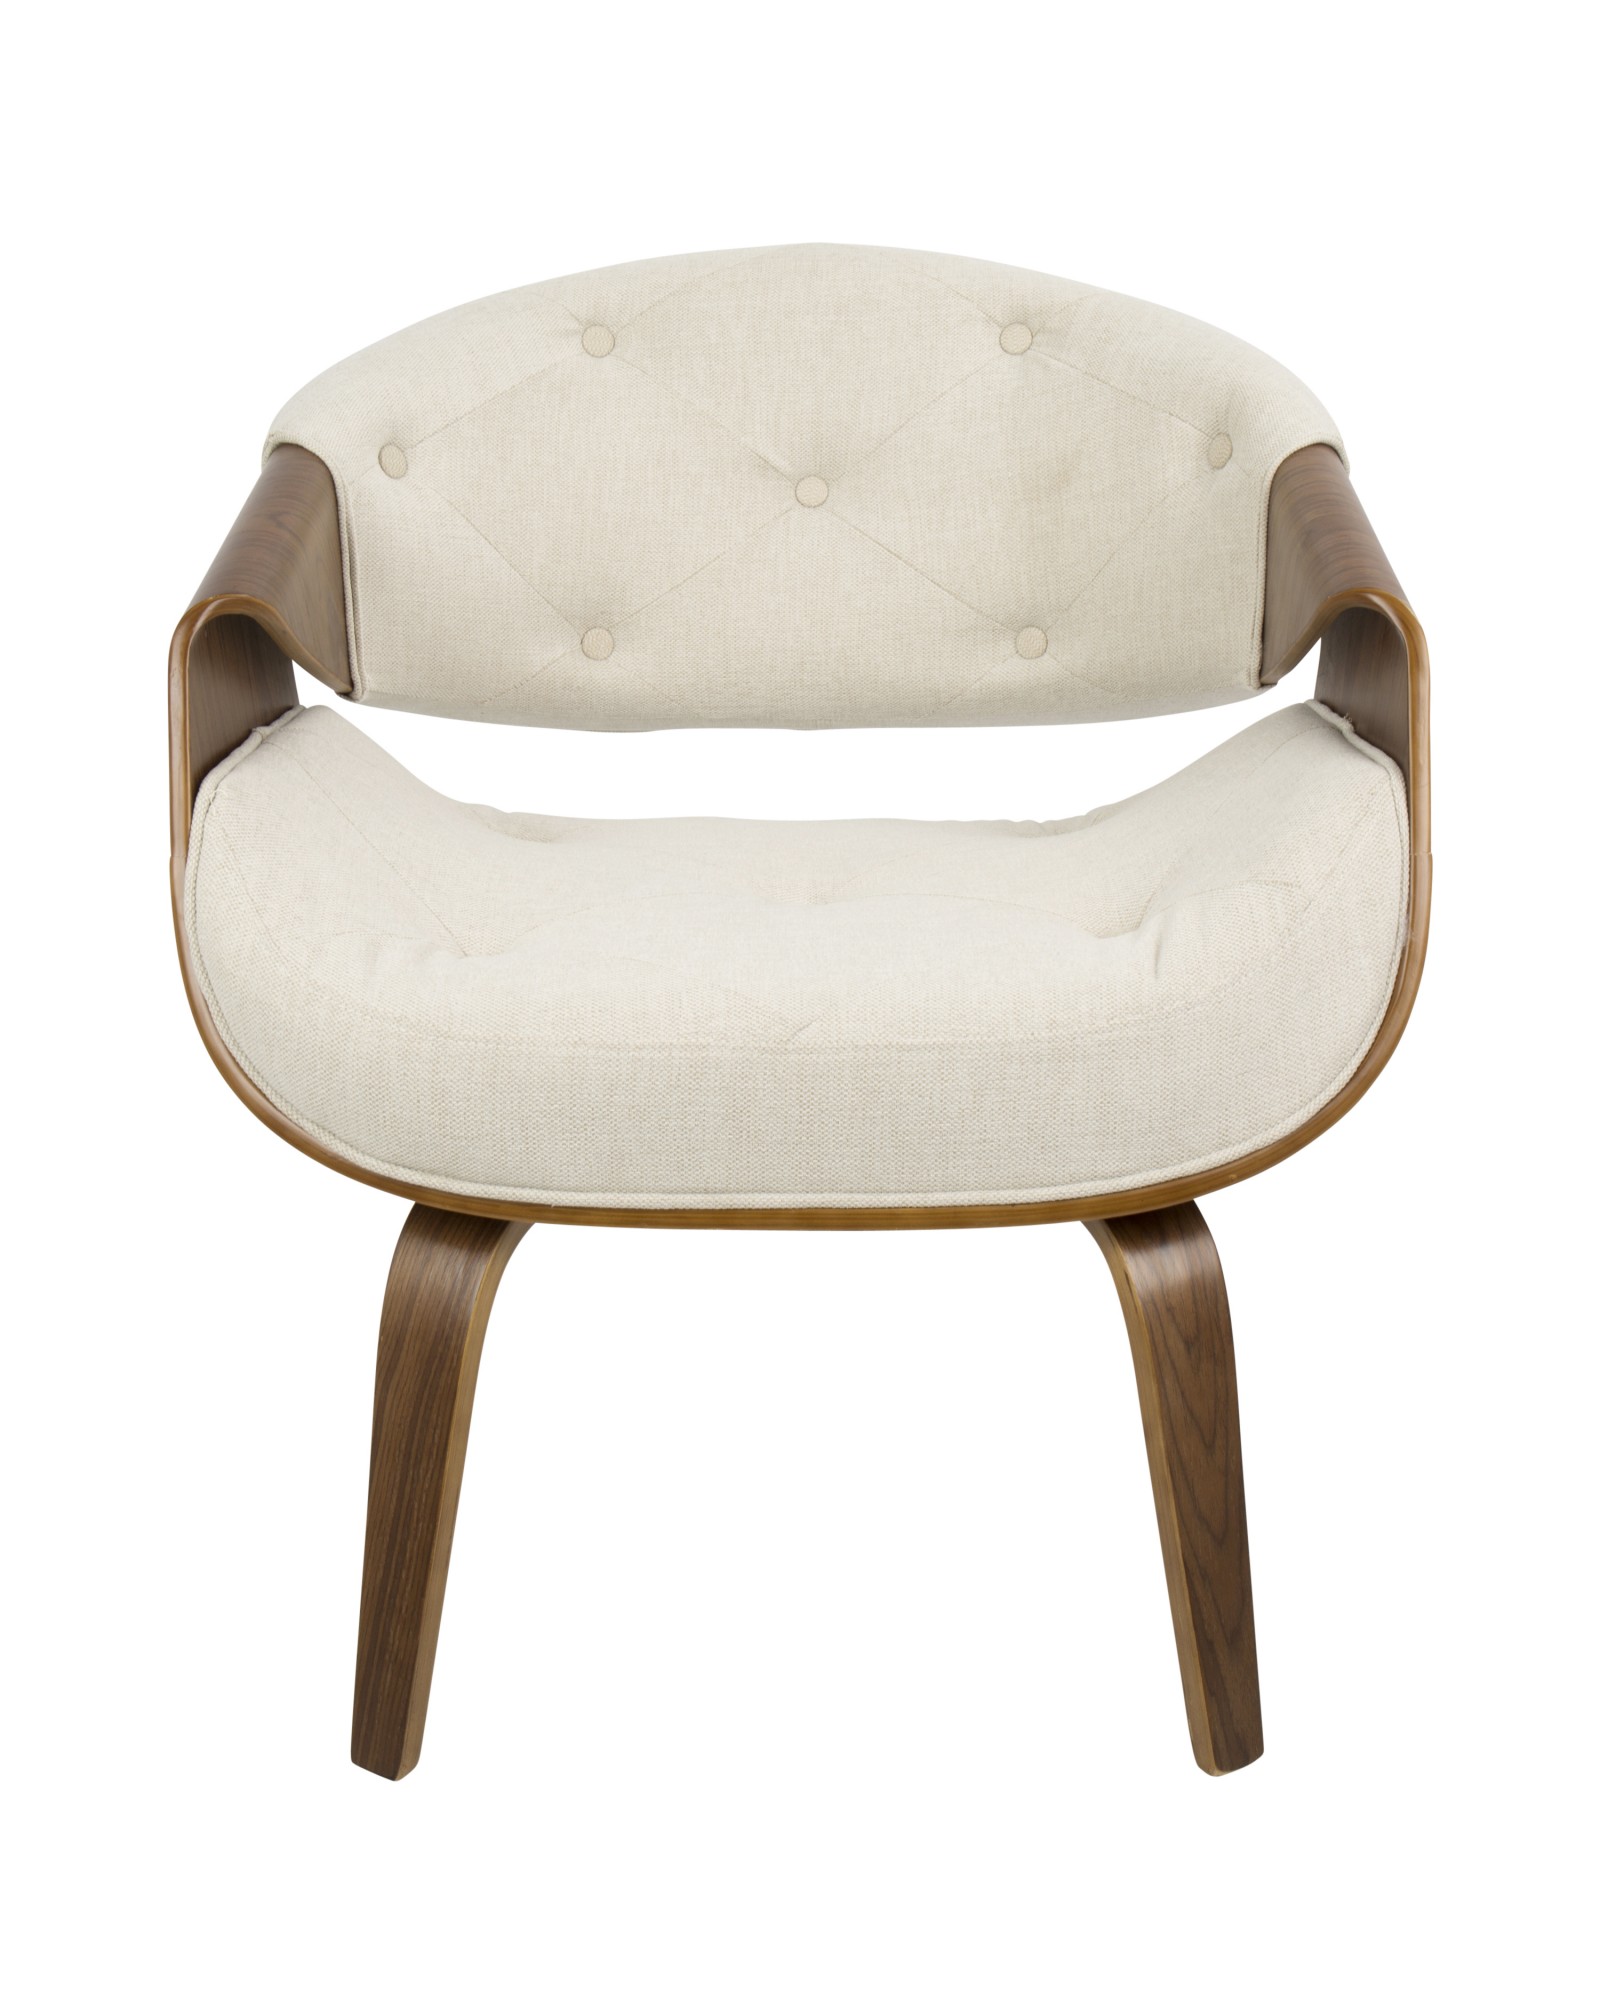 Curvo Mid-Century Modern Tufted Accent Chair in Walnut and Cream Fabric